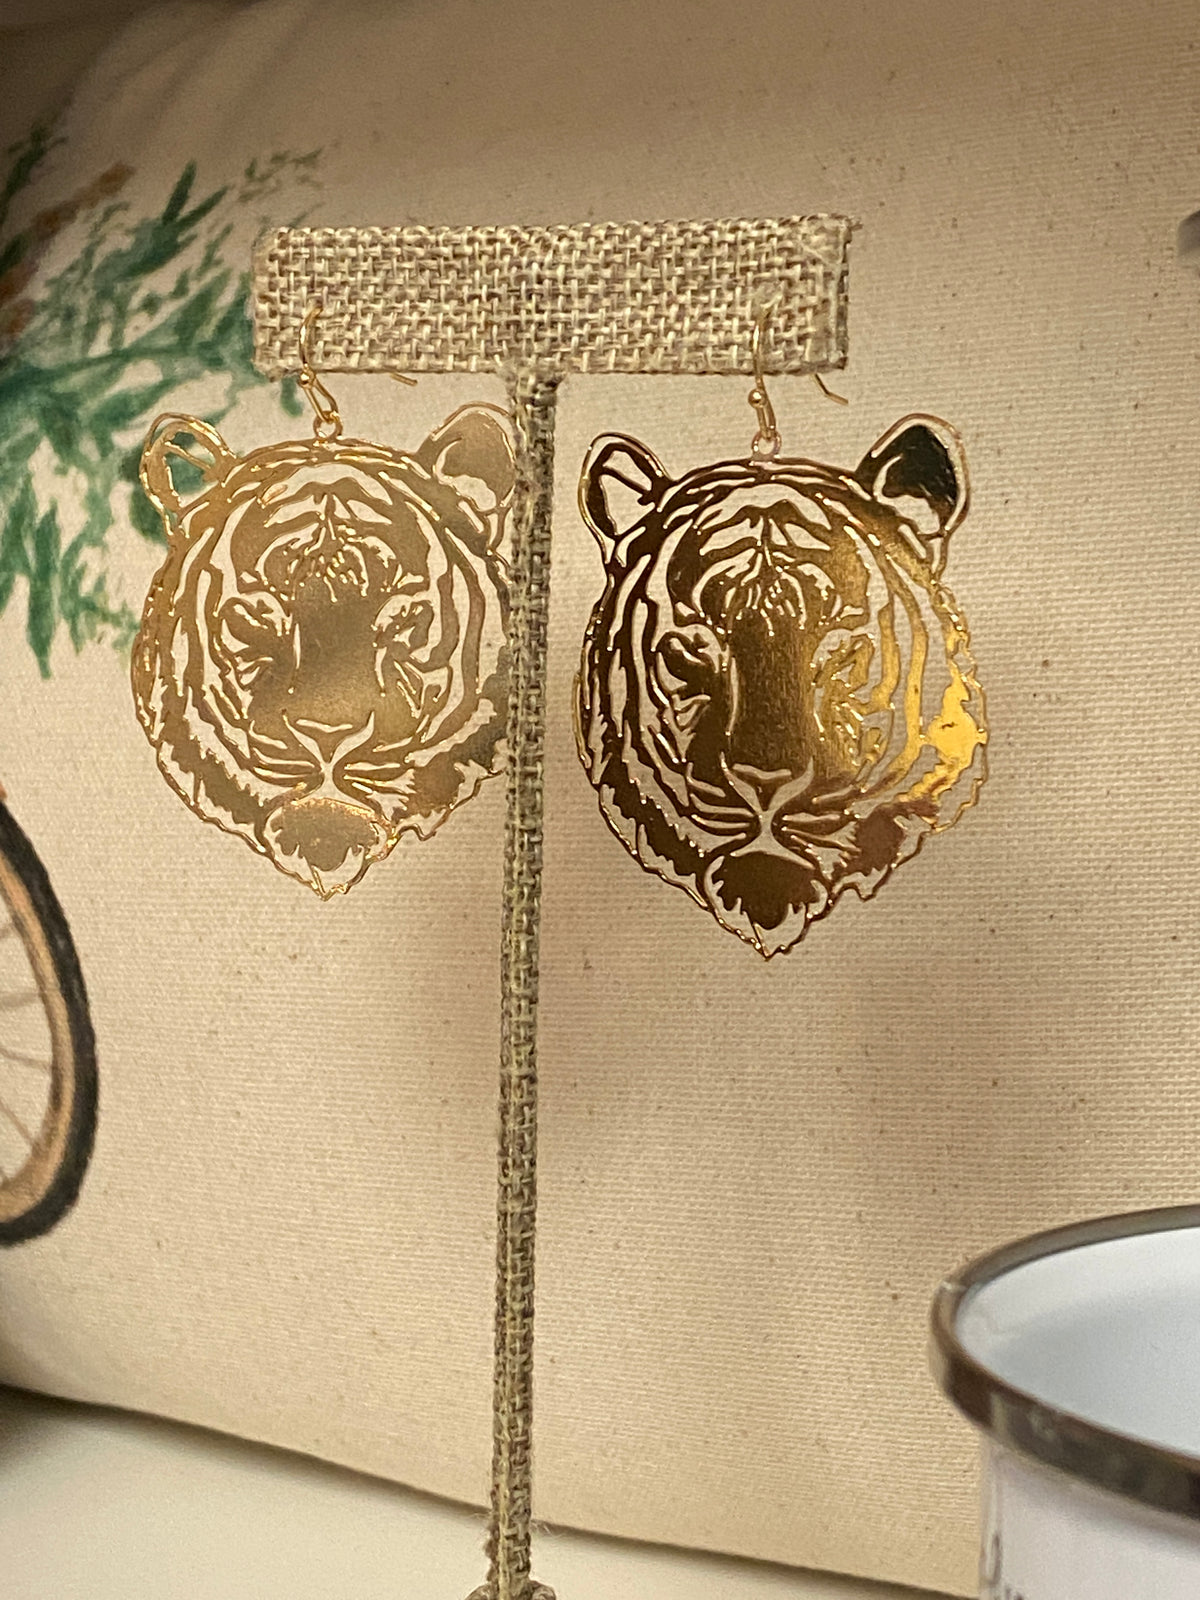 Orange and White Bengal Tiger 3D Earrings - 4 Styles